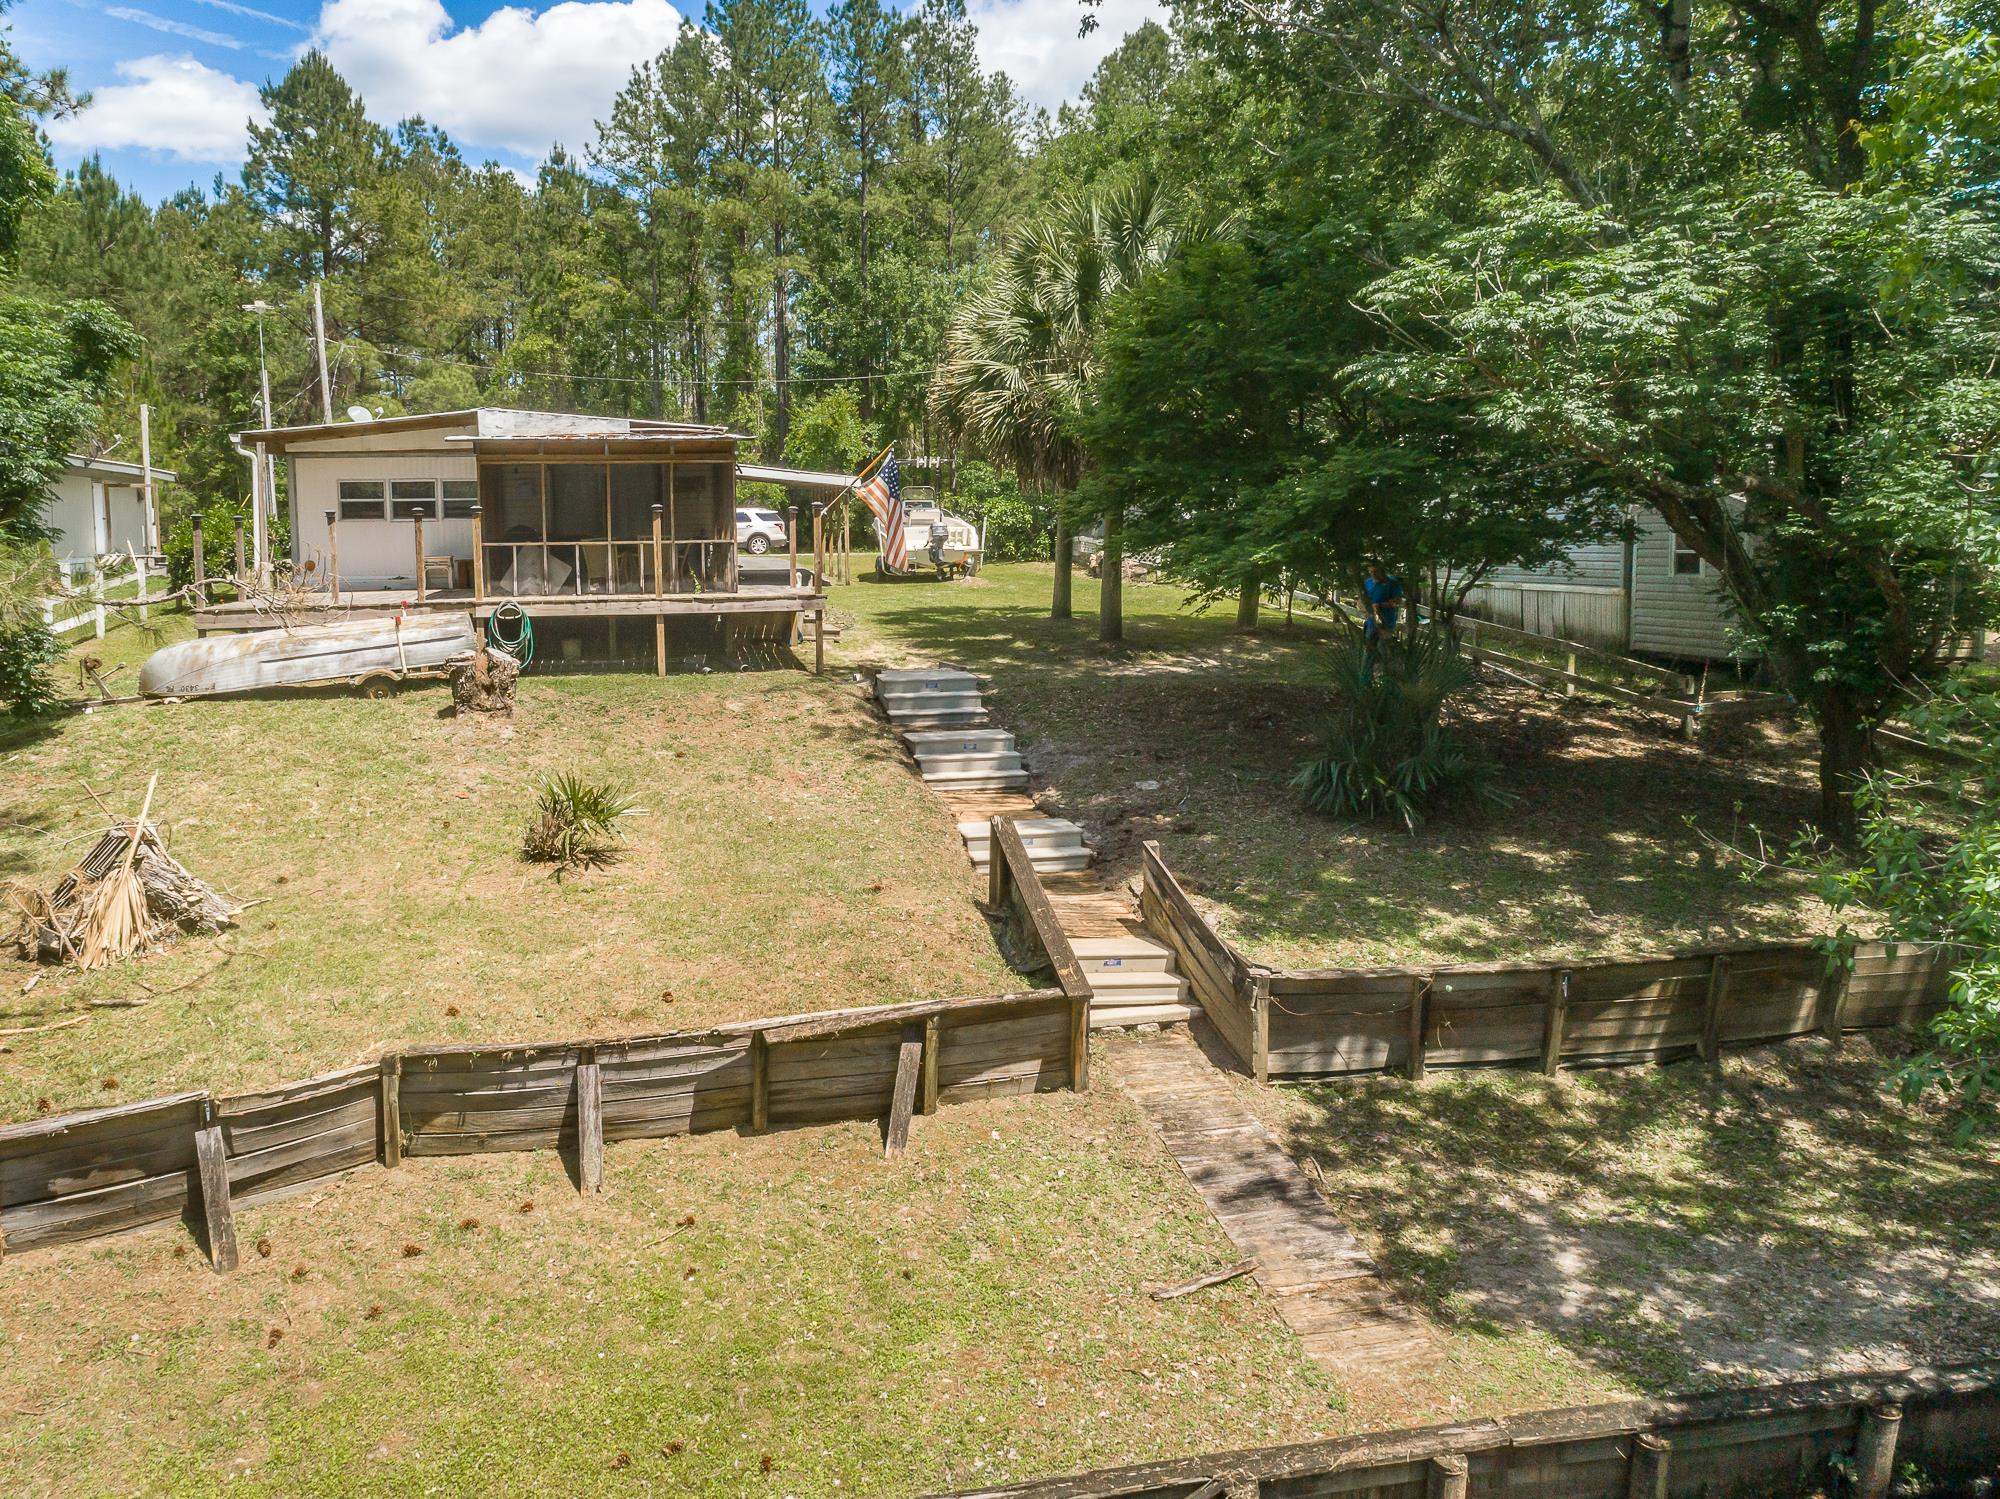 Not your ordinary Fish Camp!! This 1966 Renovated/Updated Mobile Home is Full of Charm. 3 bedrooms & 1 3/4 baths- plenty of room for family & guests.  With the Built-Over Roof, Built-On, Carport, Large front Porch, Open Deck, and Screened Porch overlooking the canal that leads to Bone Bluff Lake and the Ochlockonee River it's a water and boat lover's dream. There is outside storage for your water toys & fishing gear.  Moor your boat to Bulkhead Seawall for overnights & be ready for a day on the water. Only 2 minutes through the canal to Bone Bluff Lake which opens up into the Ochlockonee River. You are only 20 minutes to saltwater fishing and beaches. The home comes furnished and ready for occupancy. There is a mini-split Air Conditioning Unit and 2 window units for the built-on bedrooms to keep you comfy all summer long. Zoned RSU. All dimensions are approximate, please verify if important.